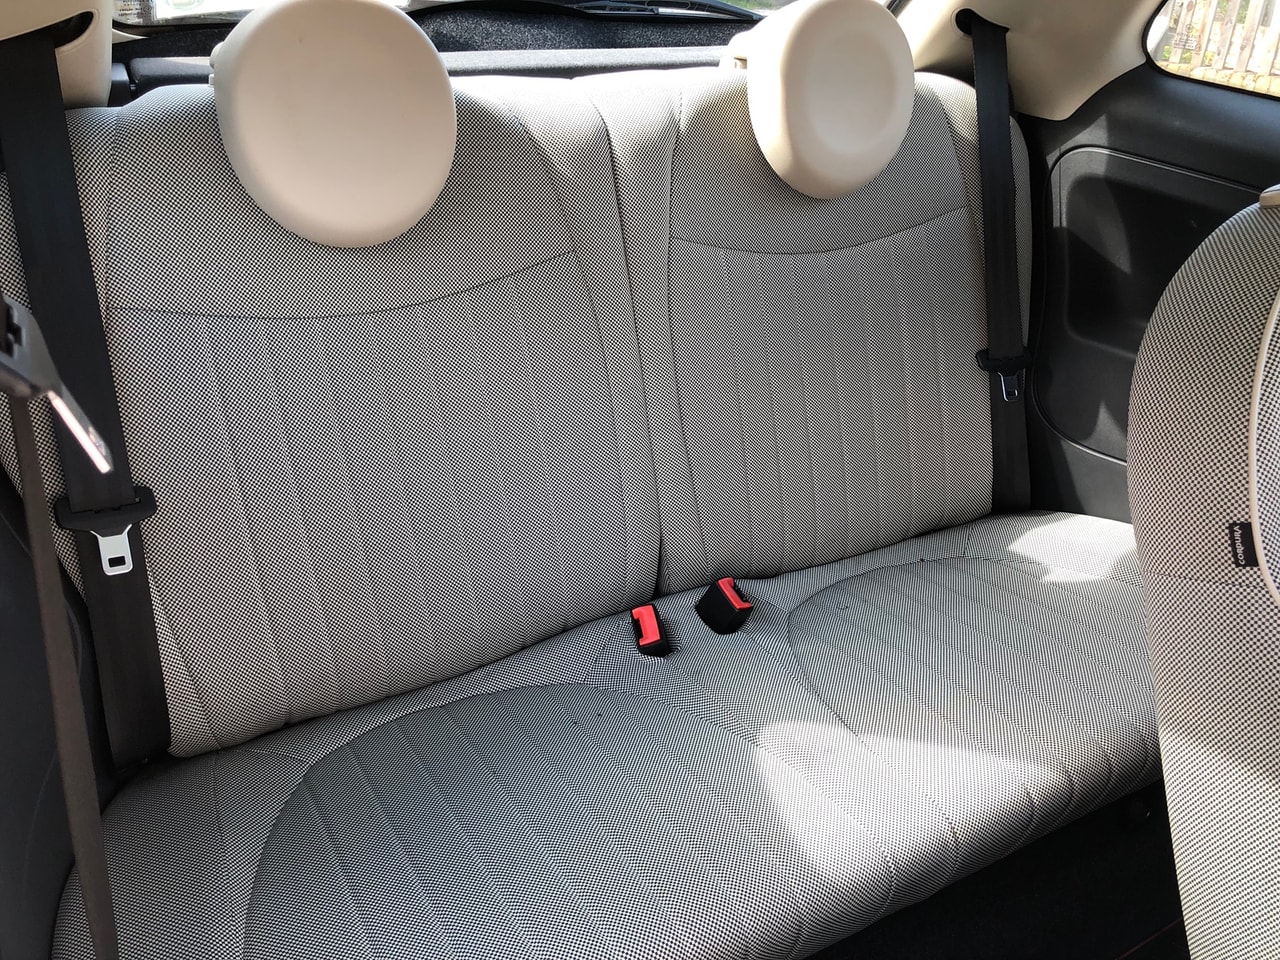 2010 FIAT 500 1.2i Lounge - Picture 8 of 11